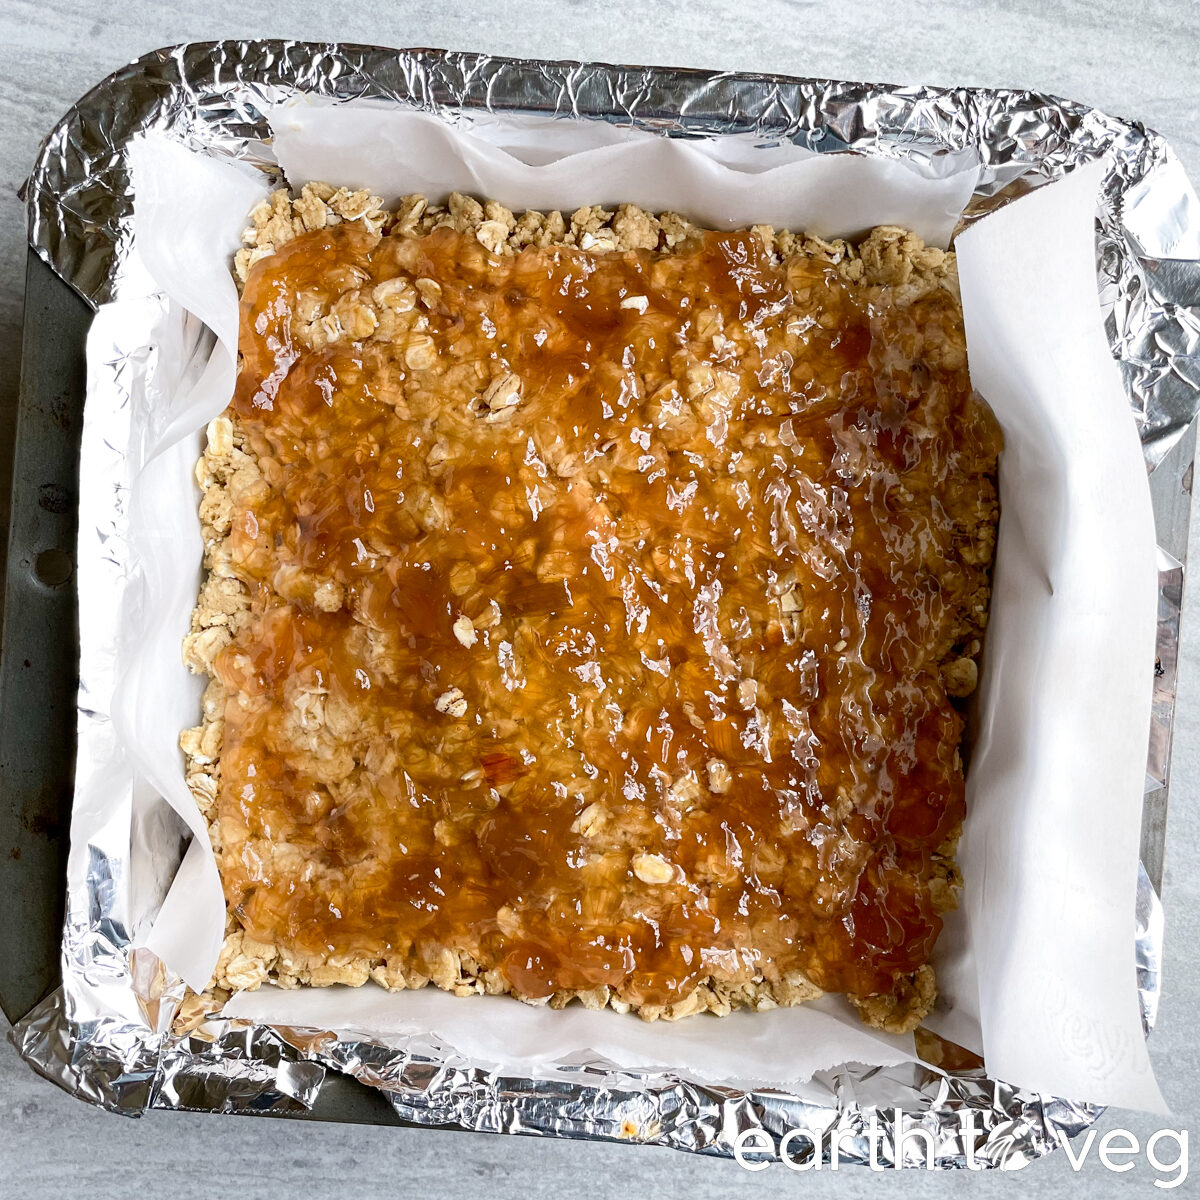 The rhubarb jam layer is spread evenly across the bottom oat-flour layer of the cake.